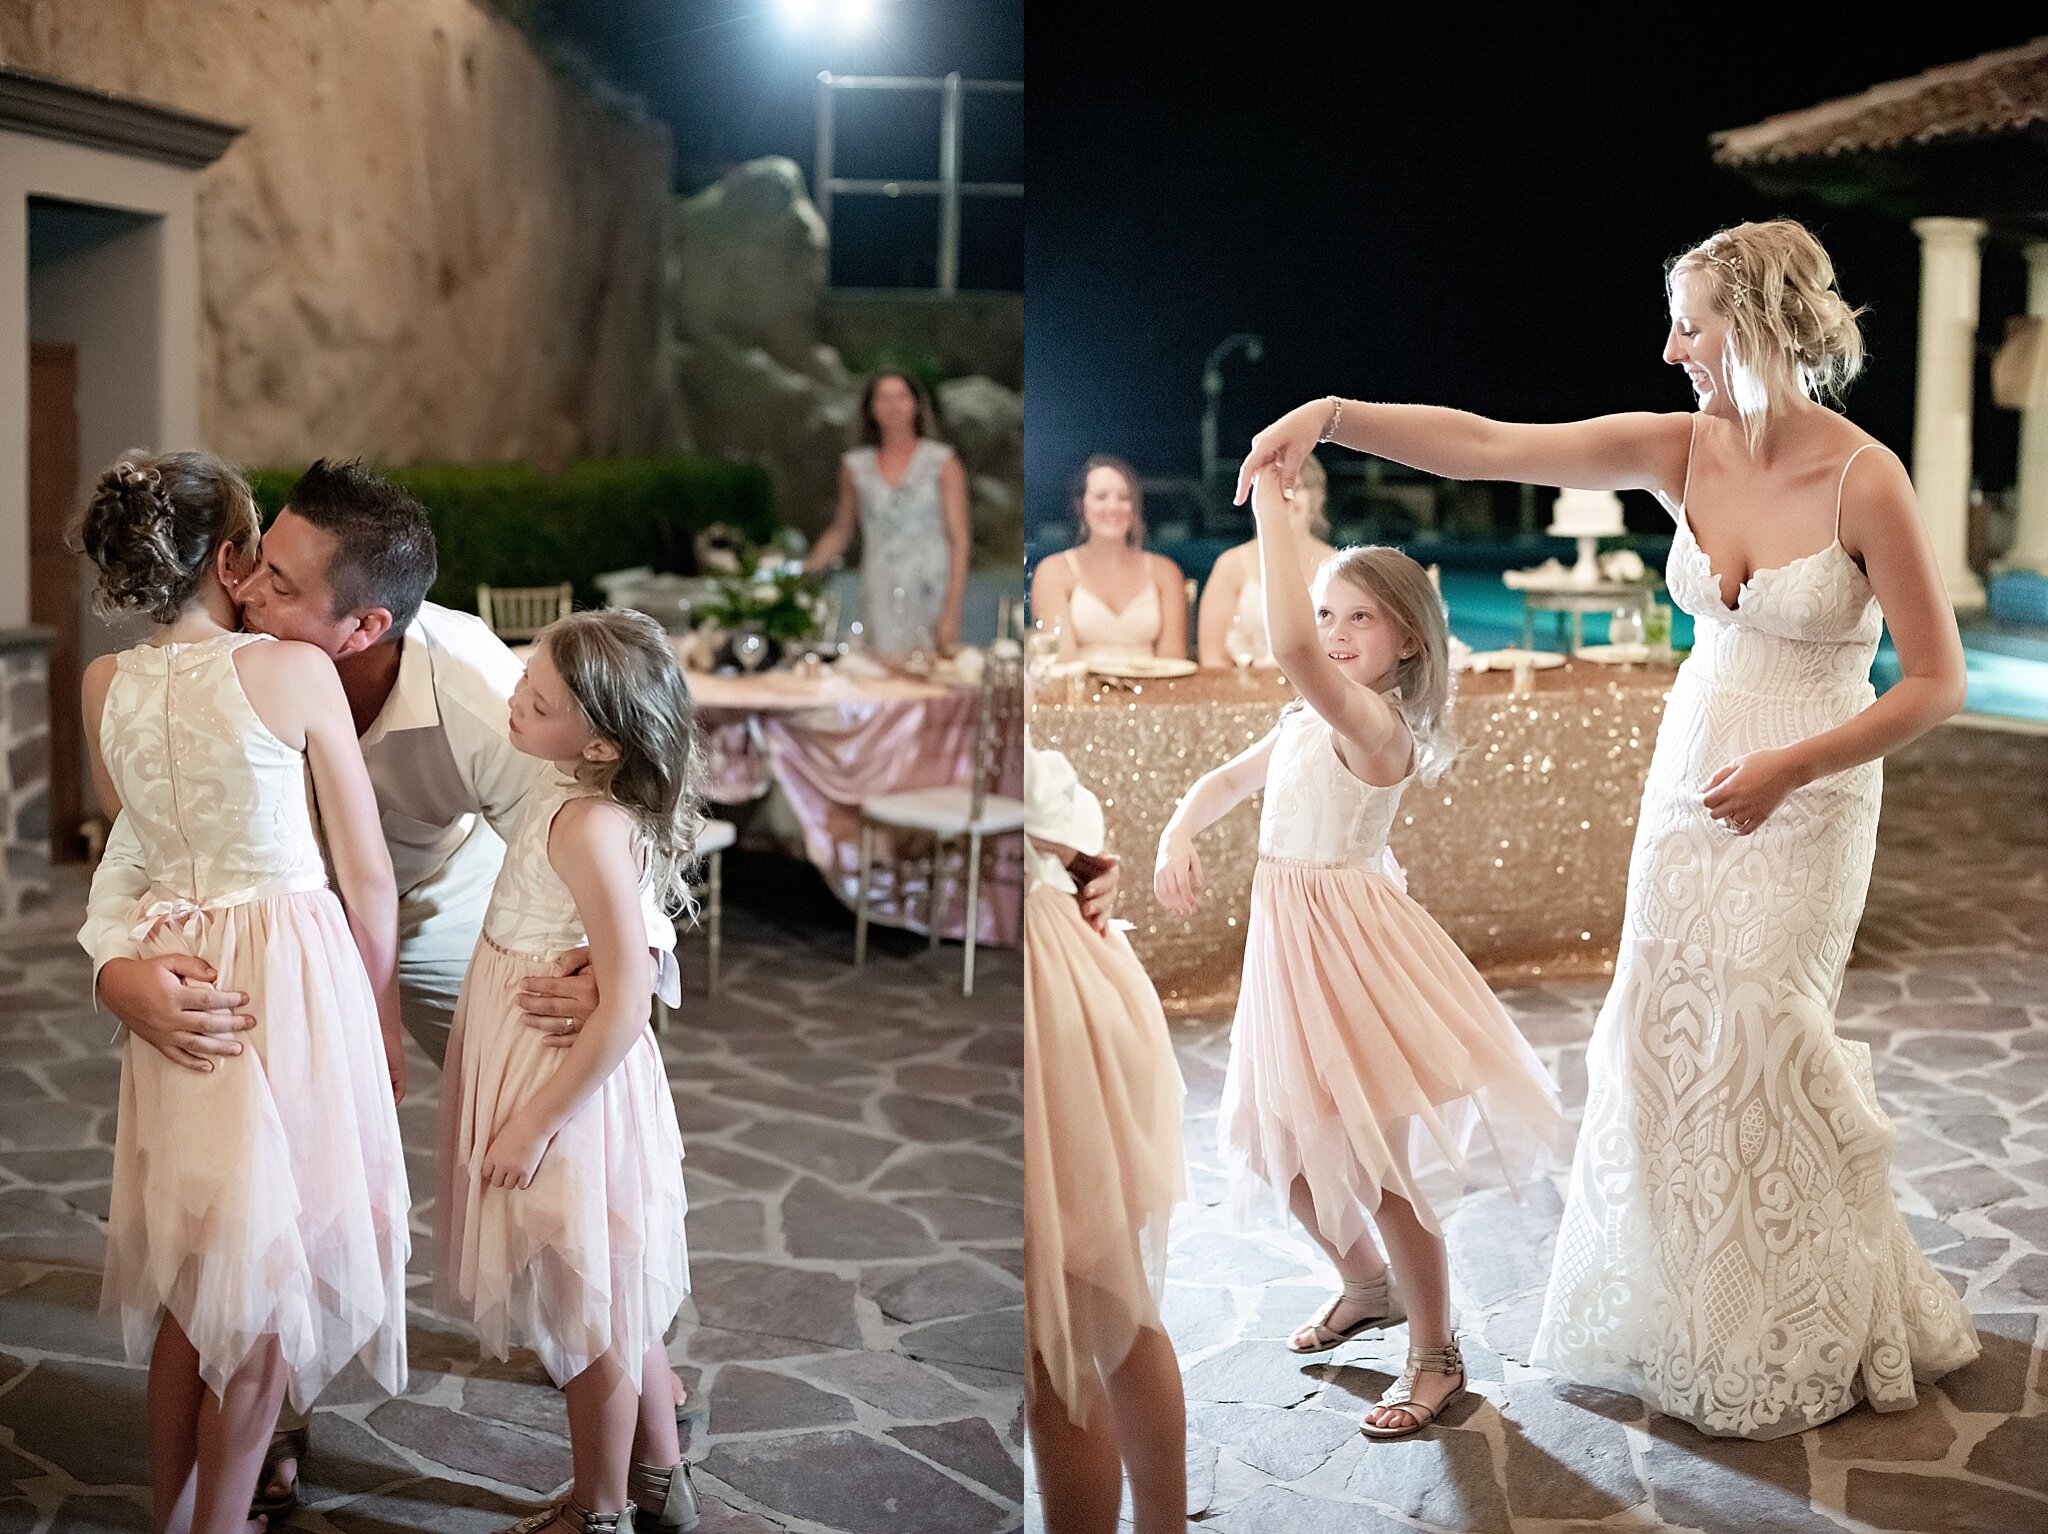 bride and groom dance with daughters at rooftop poolside wedding reception destination pueblo bonito sunset beach mexico